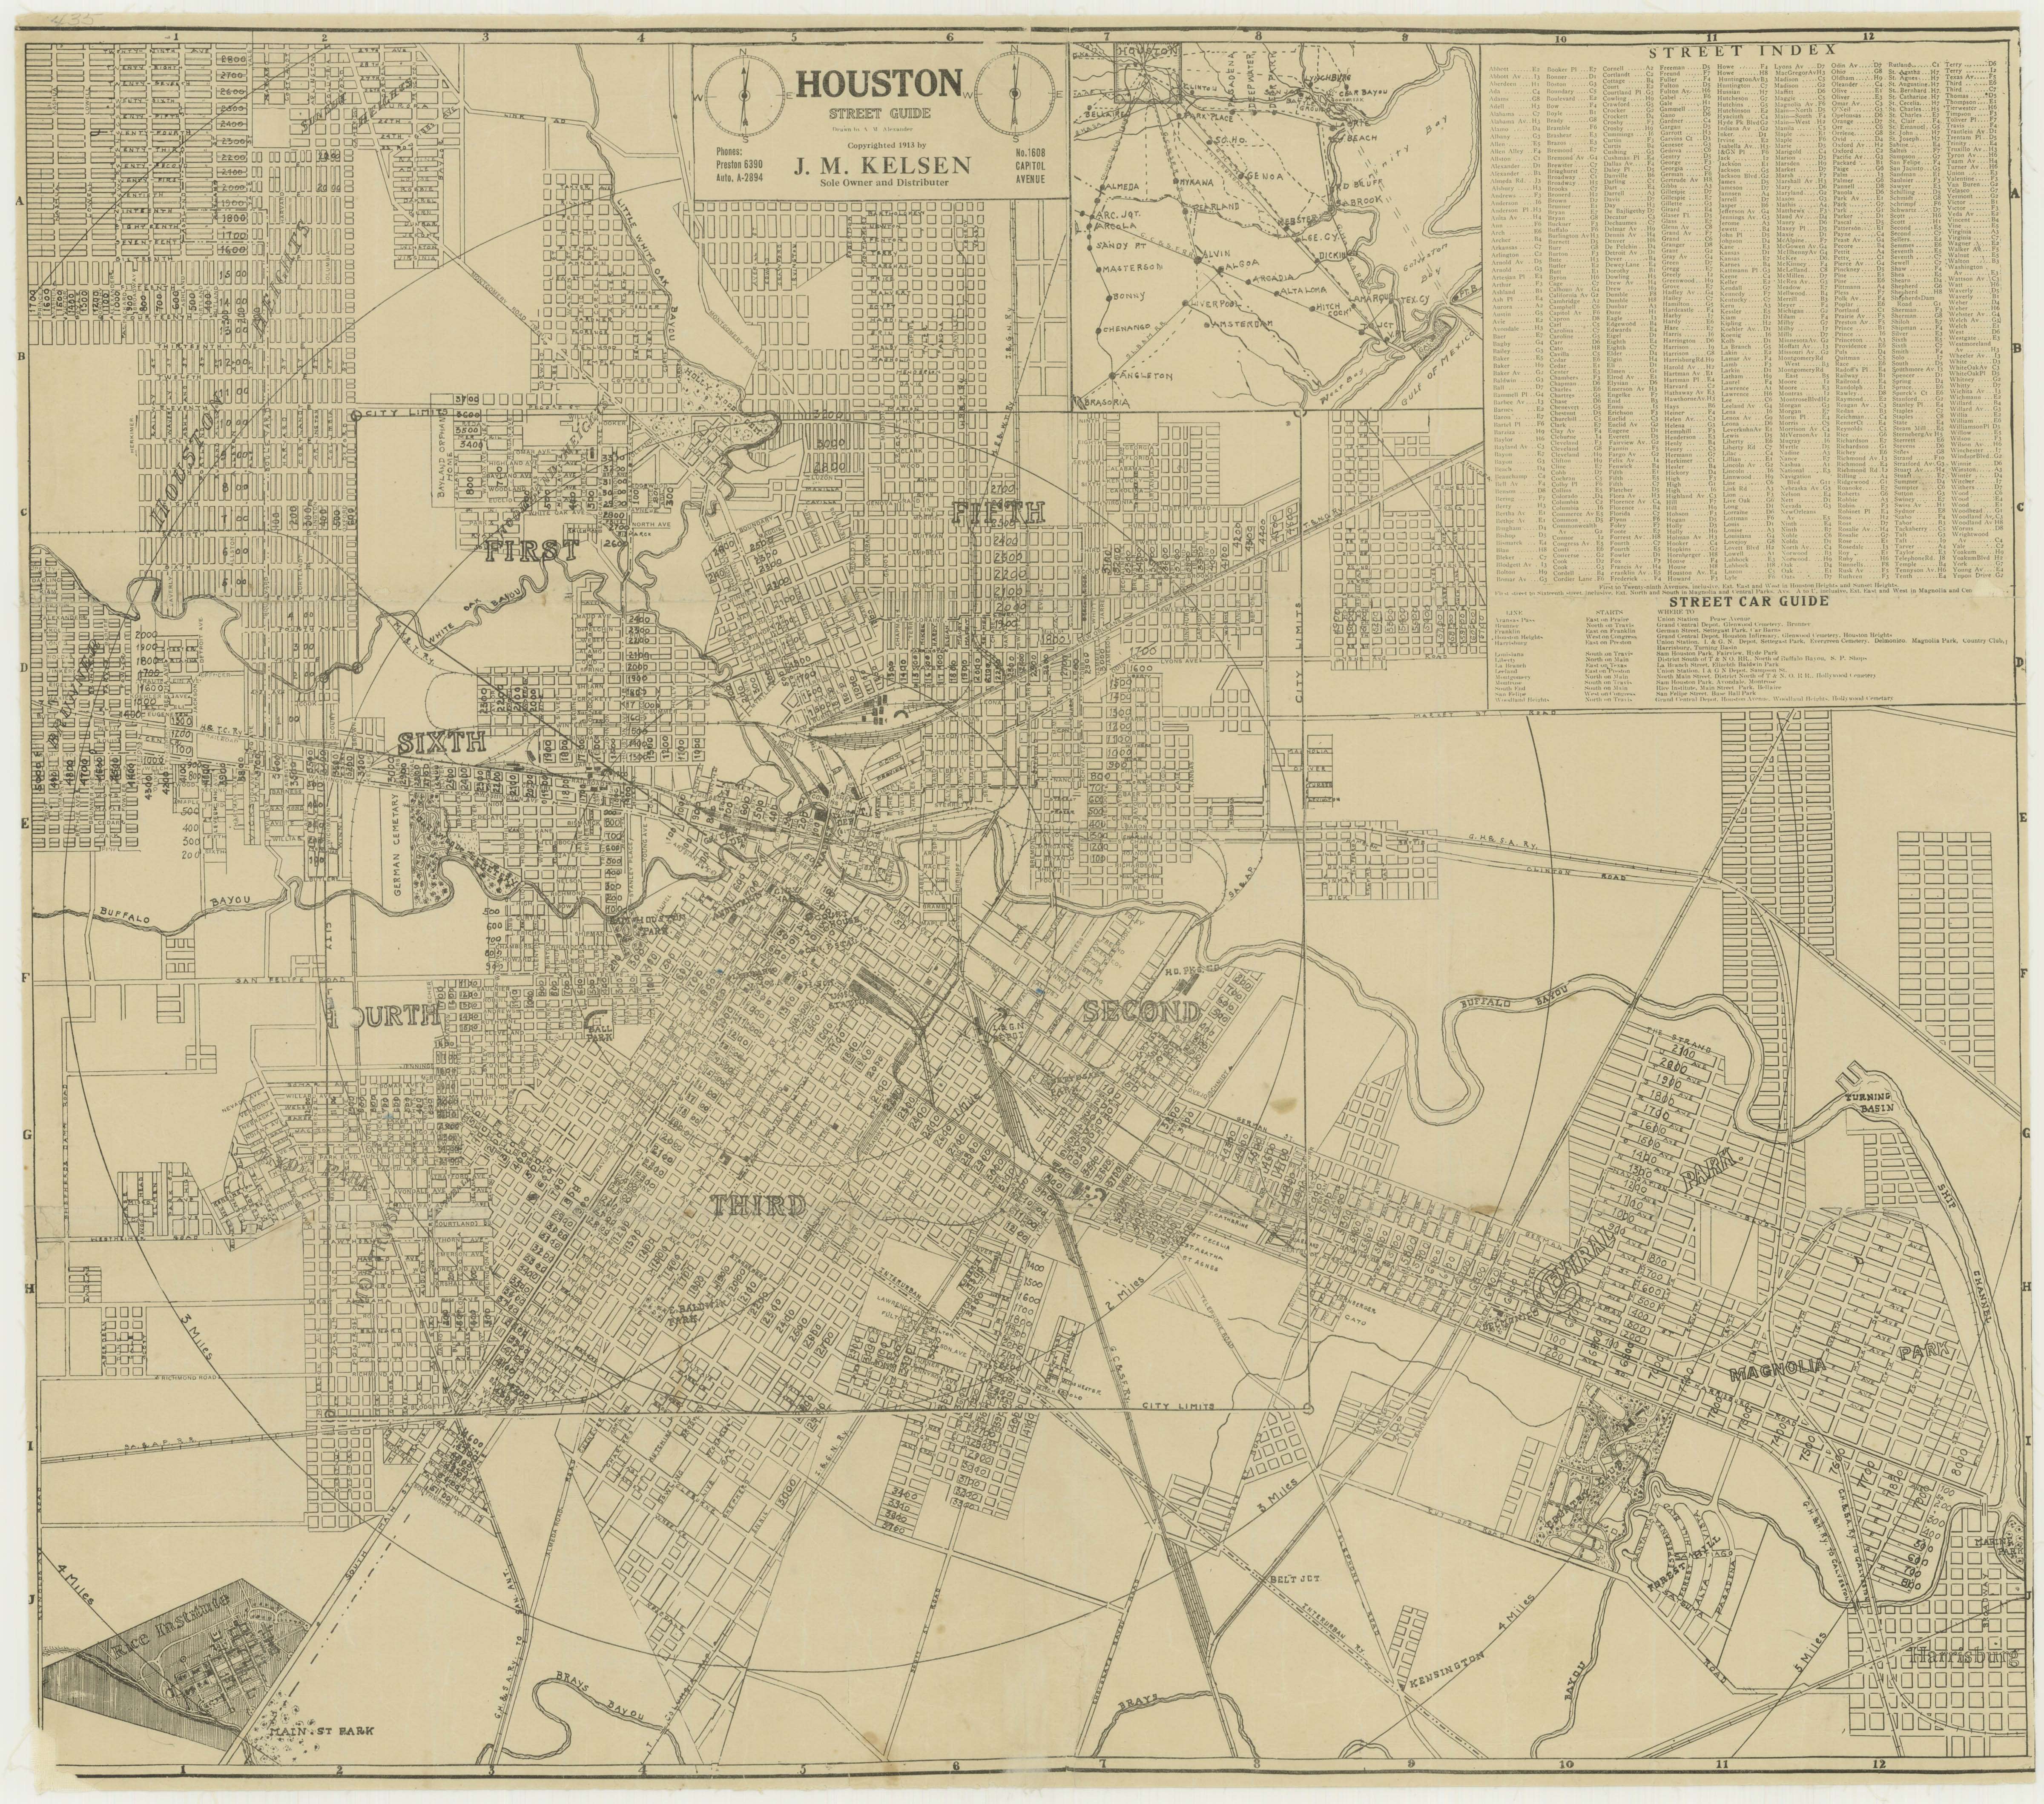 Section of a map of Houston from 1913, showing the location of the park. (Select the image to view the full map.)